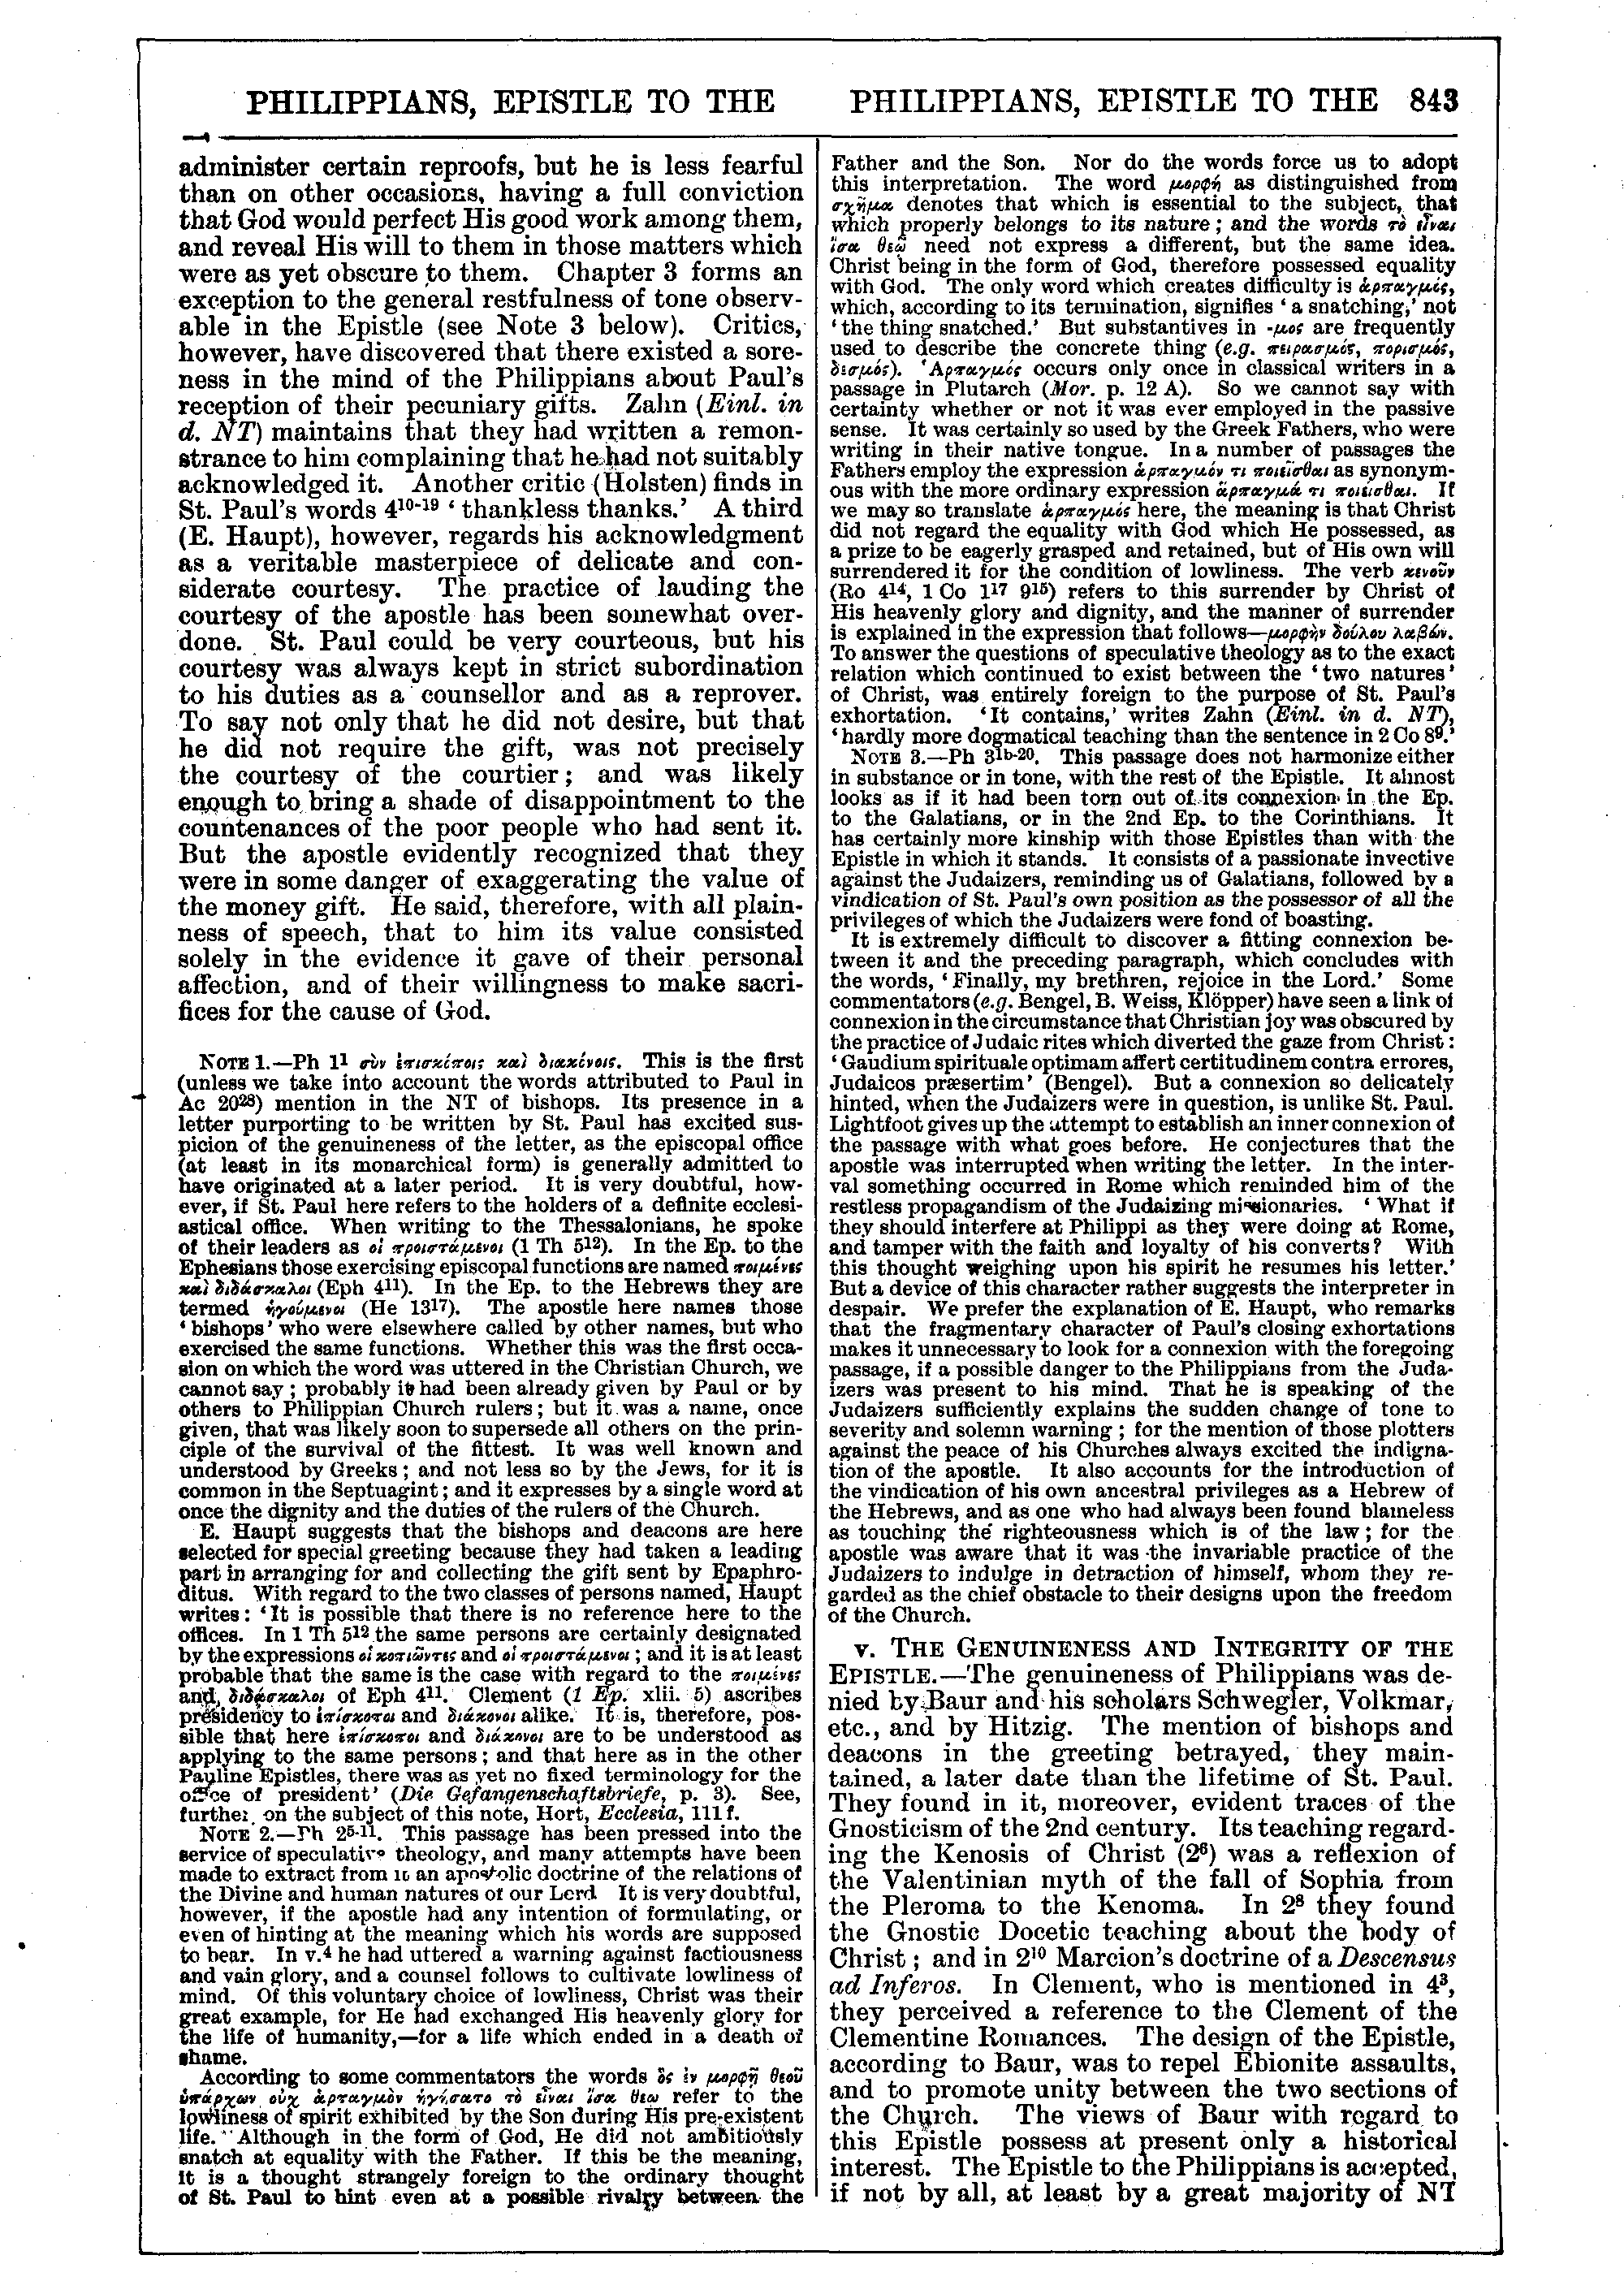 Image of page 843